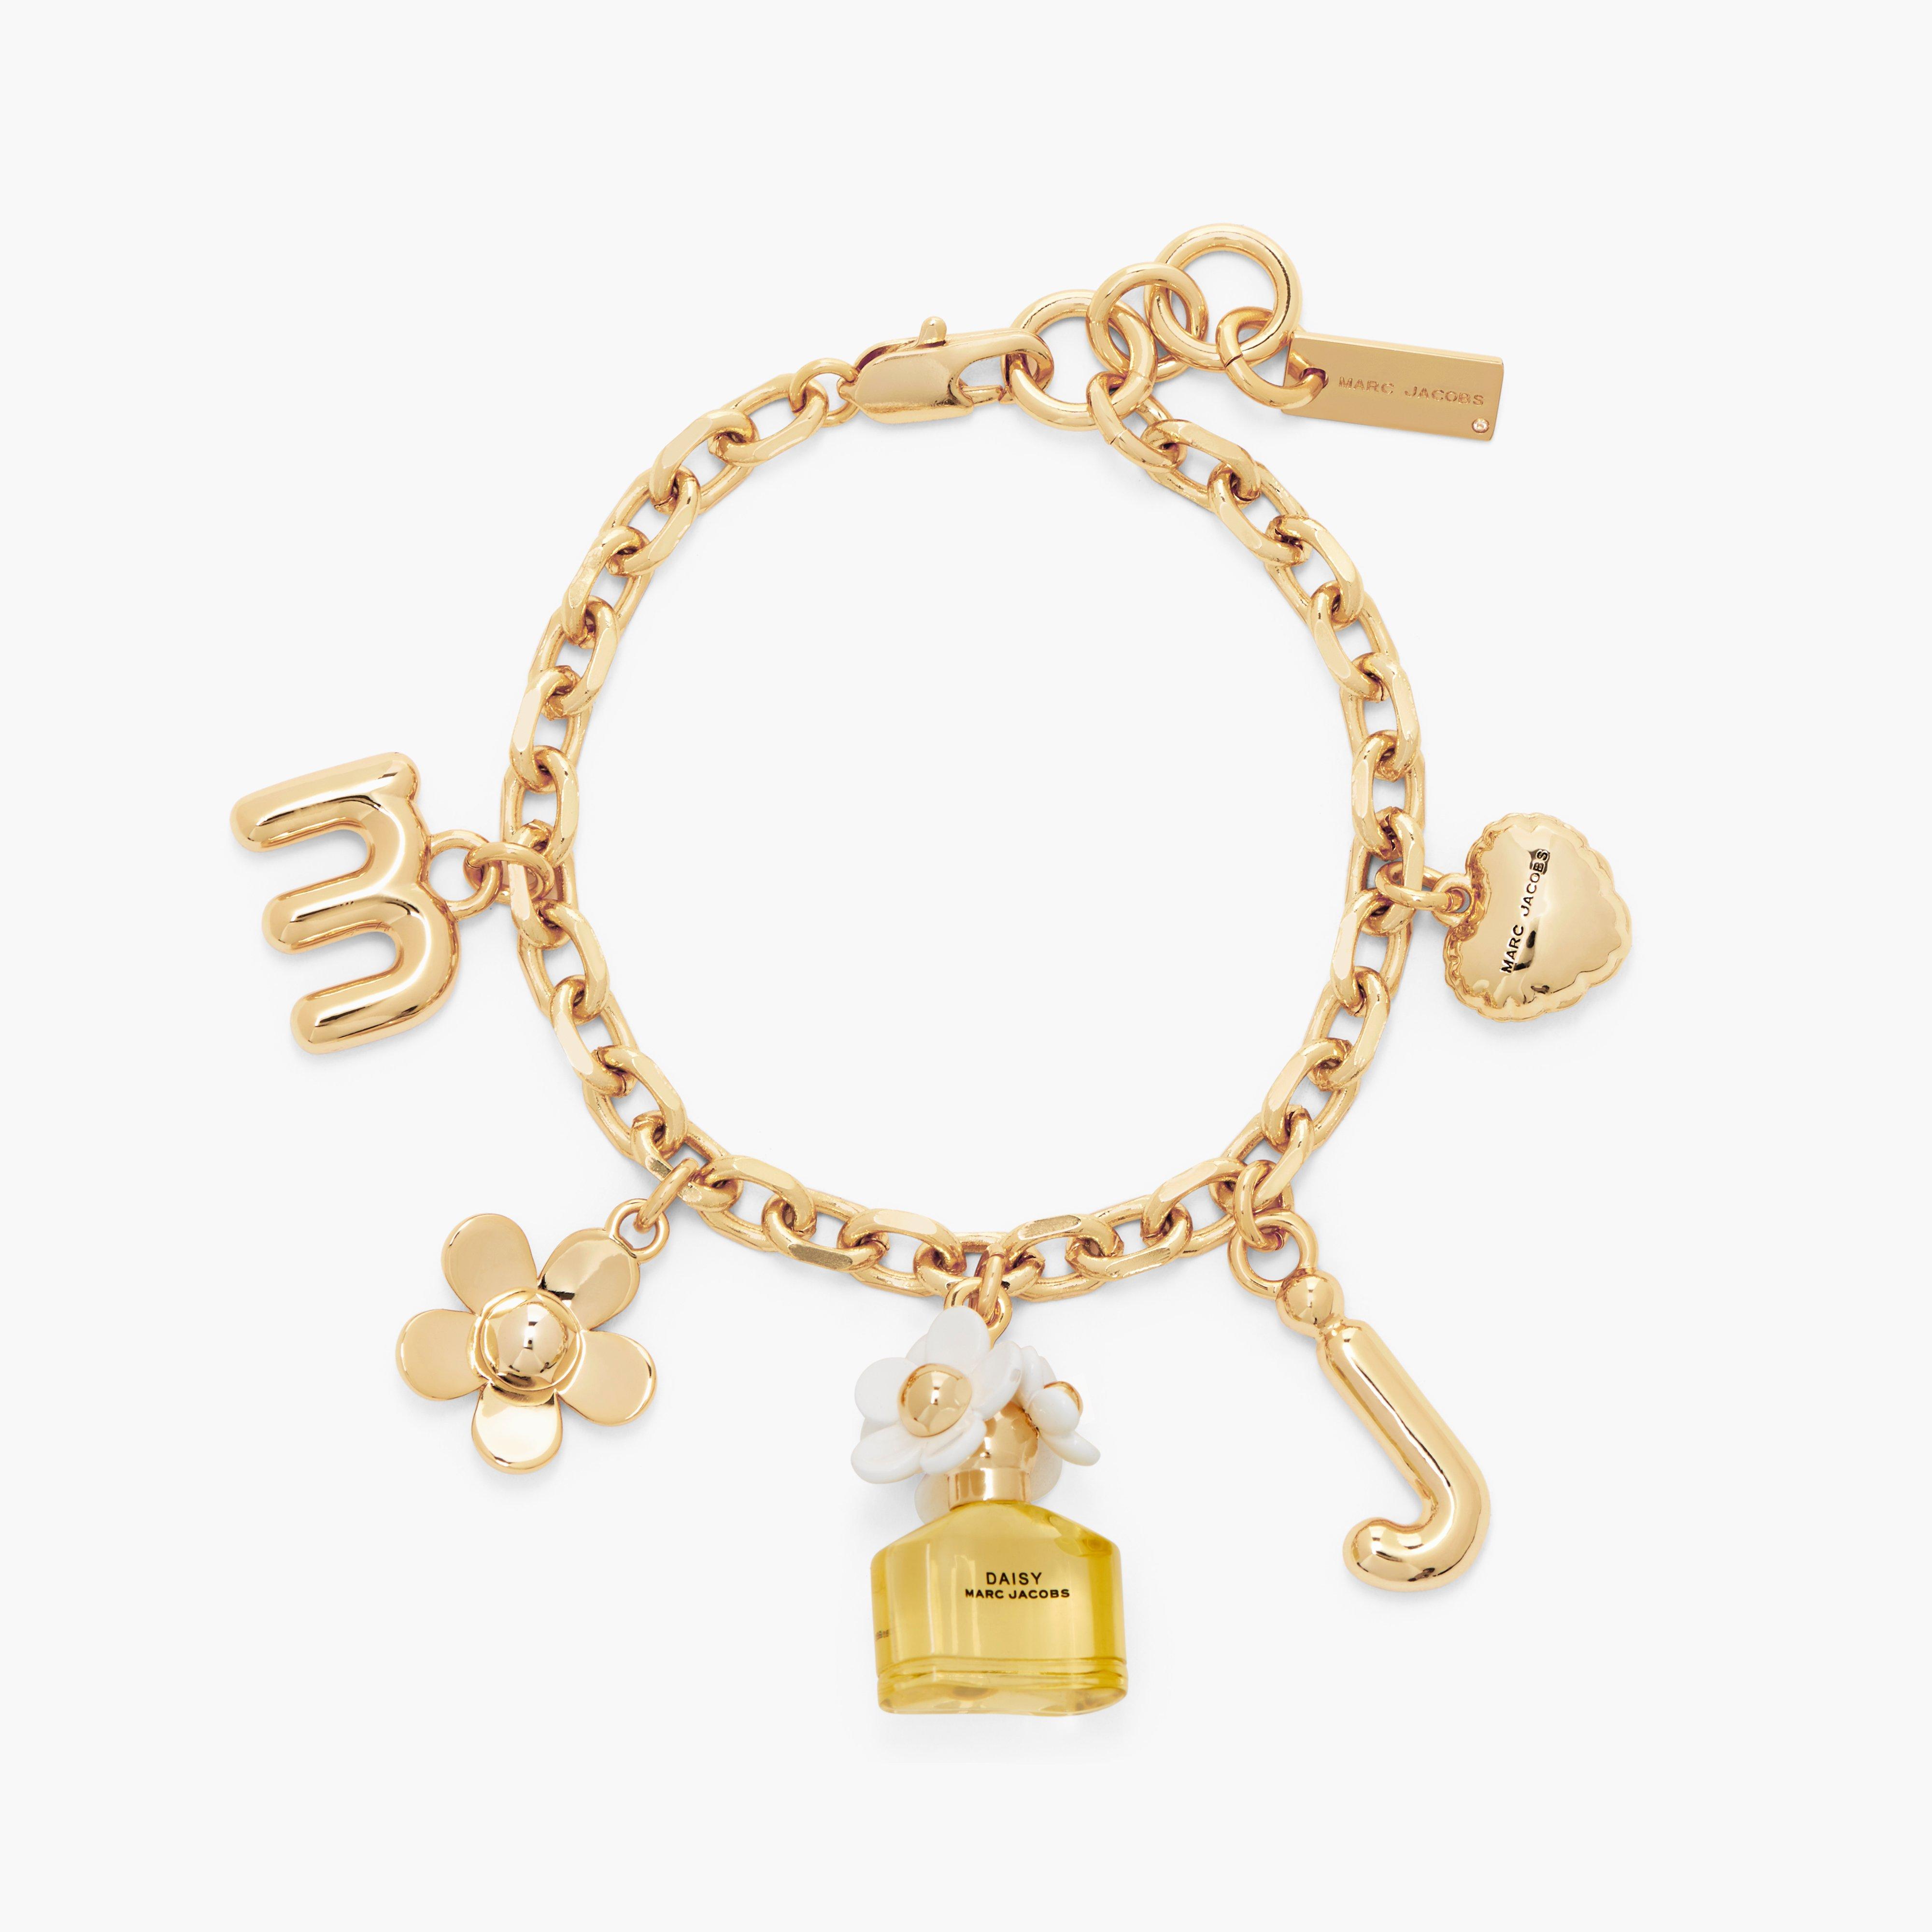 Marc by Marc jacobs Daisy Charm Bracelet,GOLD/YELLOW MULTI